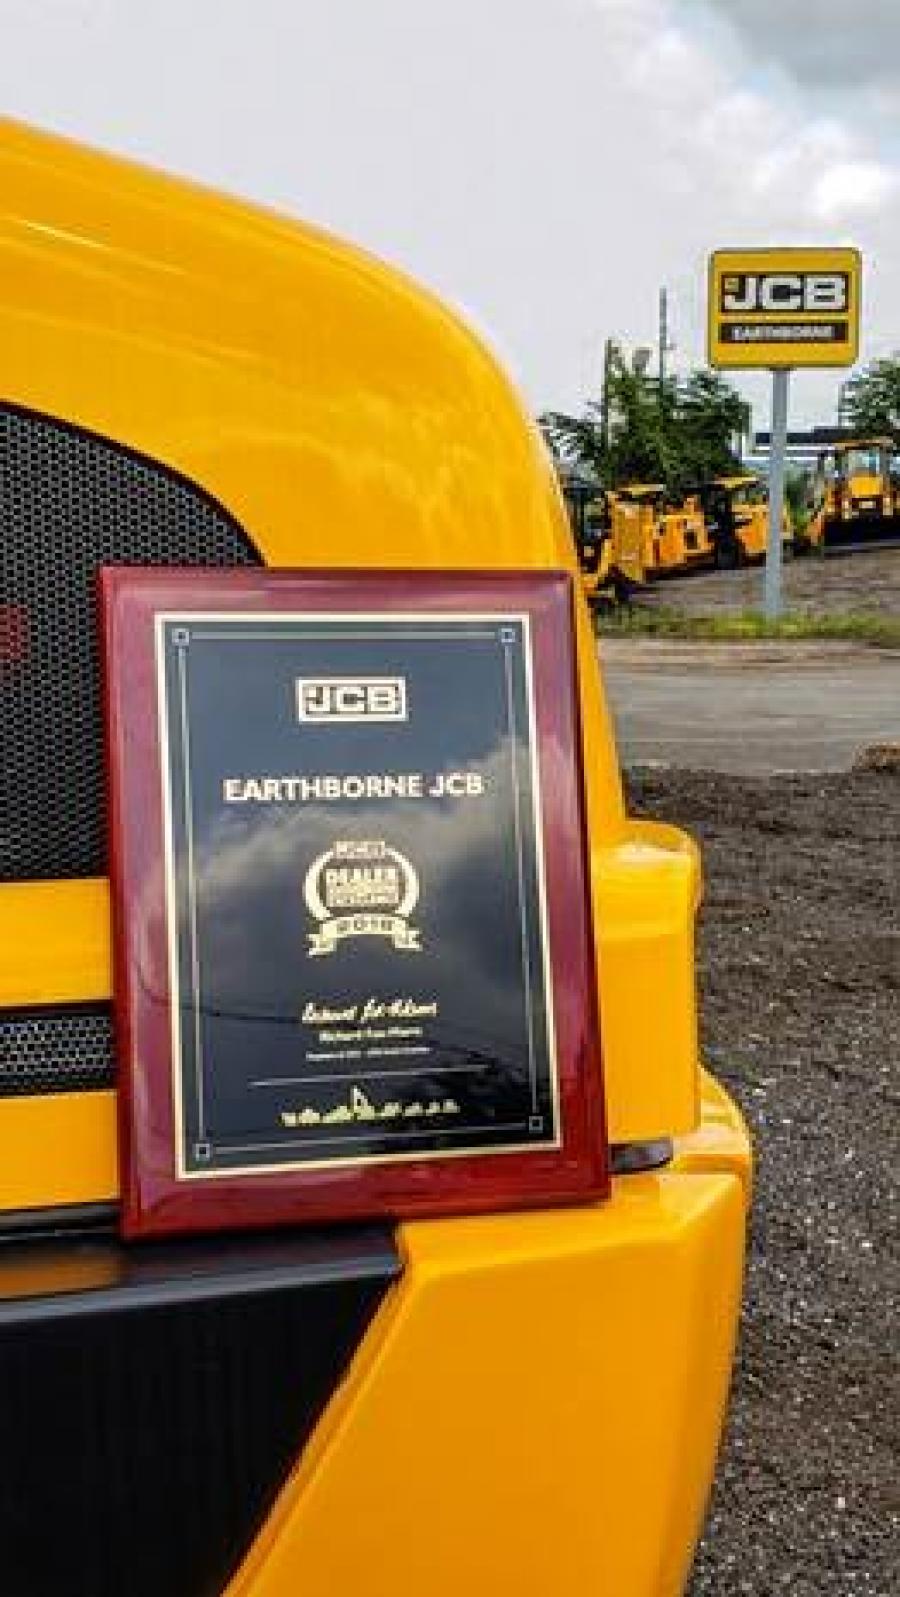 The Earthborne JCB Dealer of Excellence plaque, proudly propped on a JCB wheel loader.